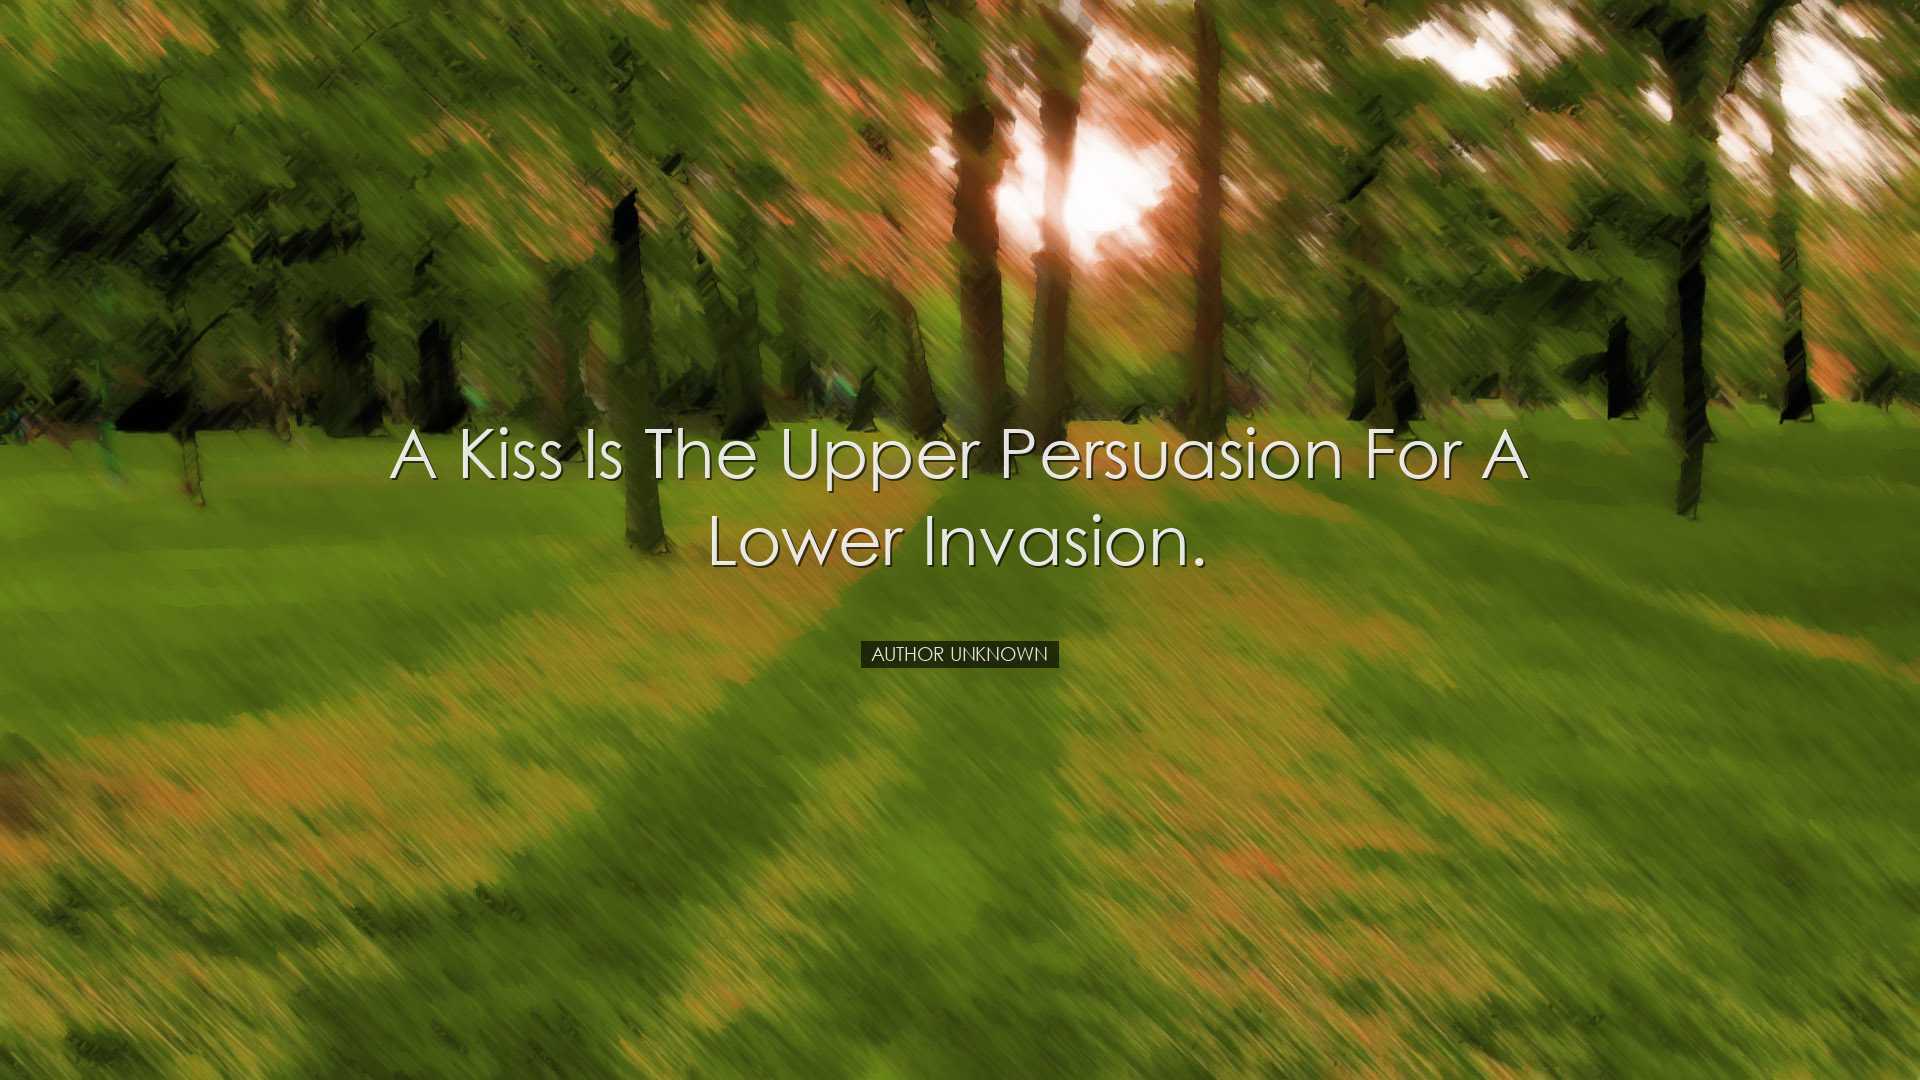 A kiss is the upper persuasion for a lower invasion. - Author Unkn